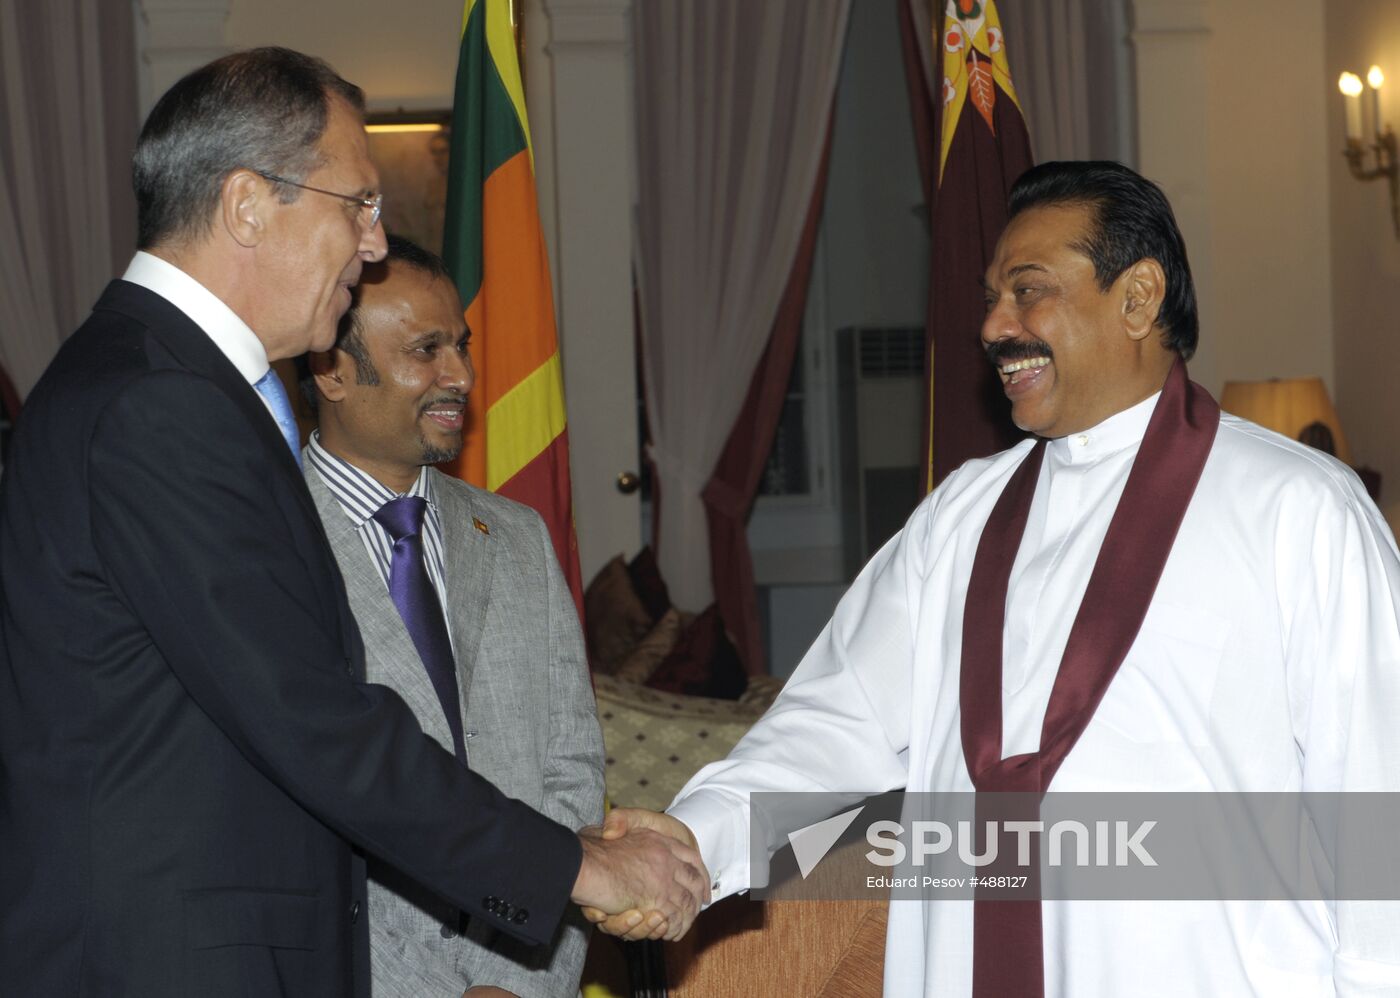 Russian Foreign Minister and Sri Lanka President meet in Colombo